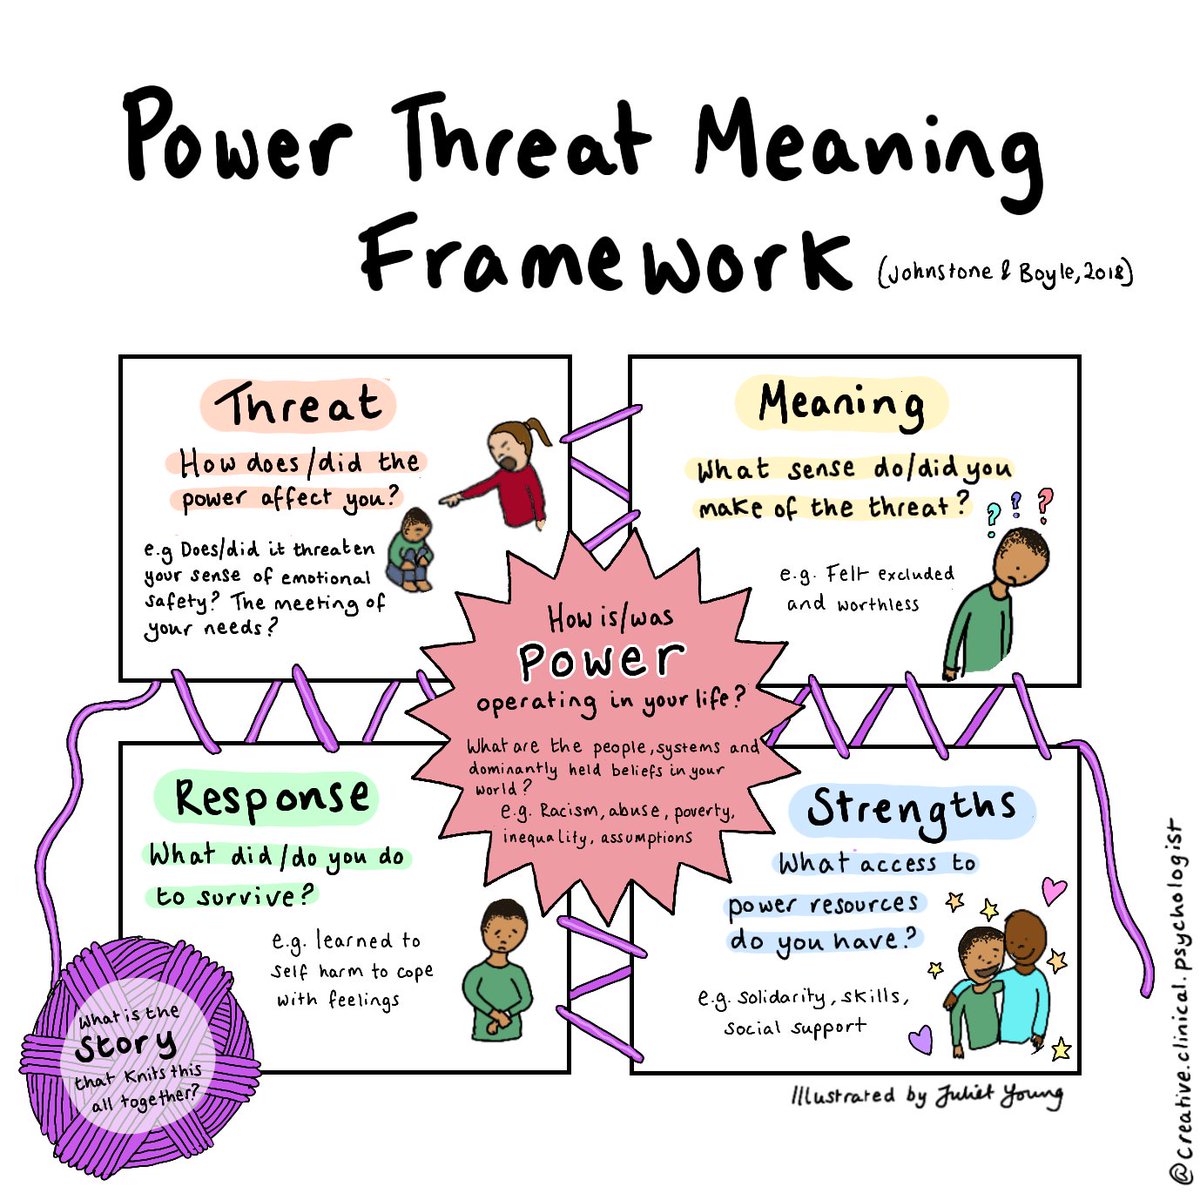 This is the second adaptation of the Power Threat Meaning Framework I've drawn. I hope it brings some clarity to an interesting but complex framework developed by @ClinpsychLucy and Mary Boyle as an alternative to the diagnostic model. #powerthreatmeaningframework #ptmf